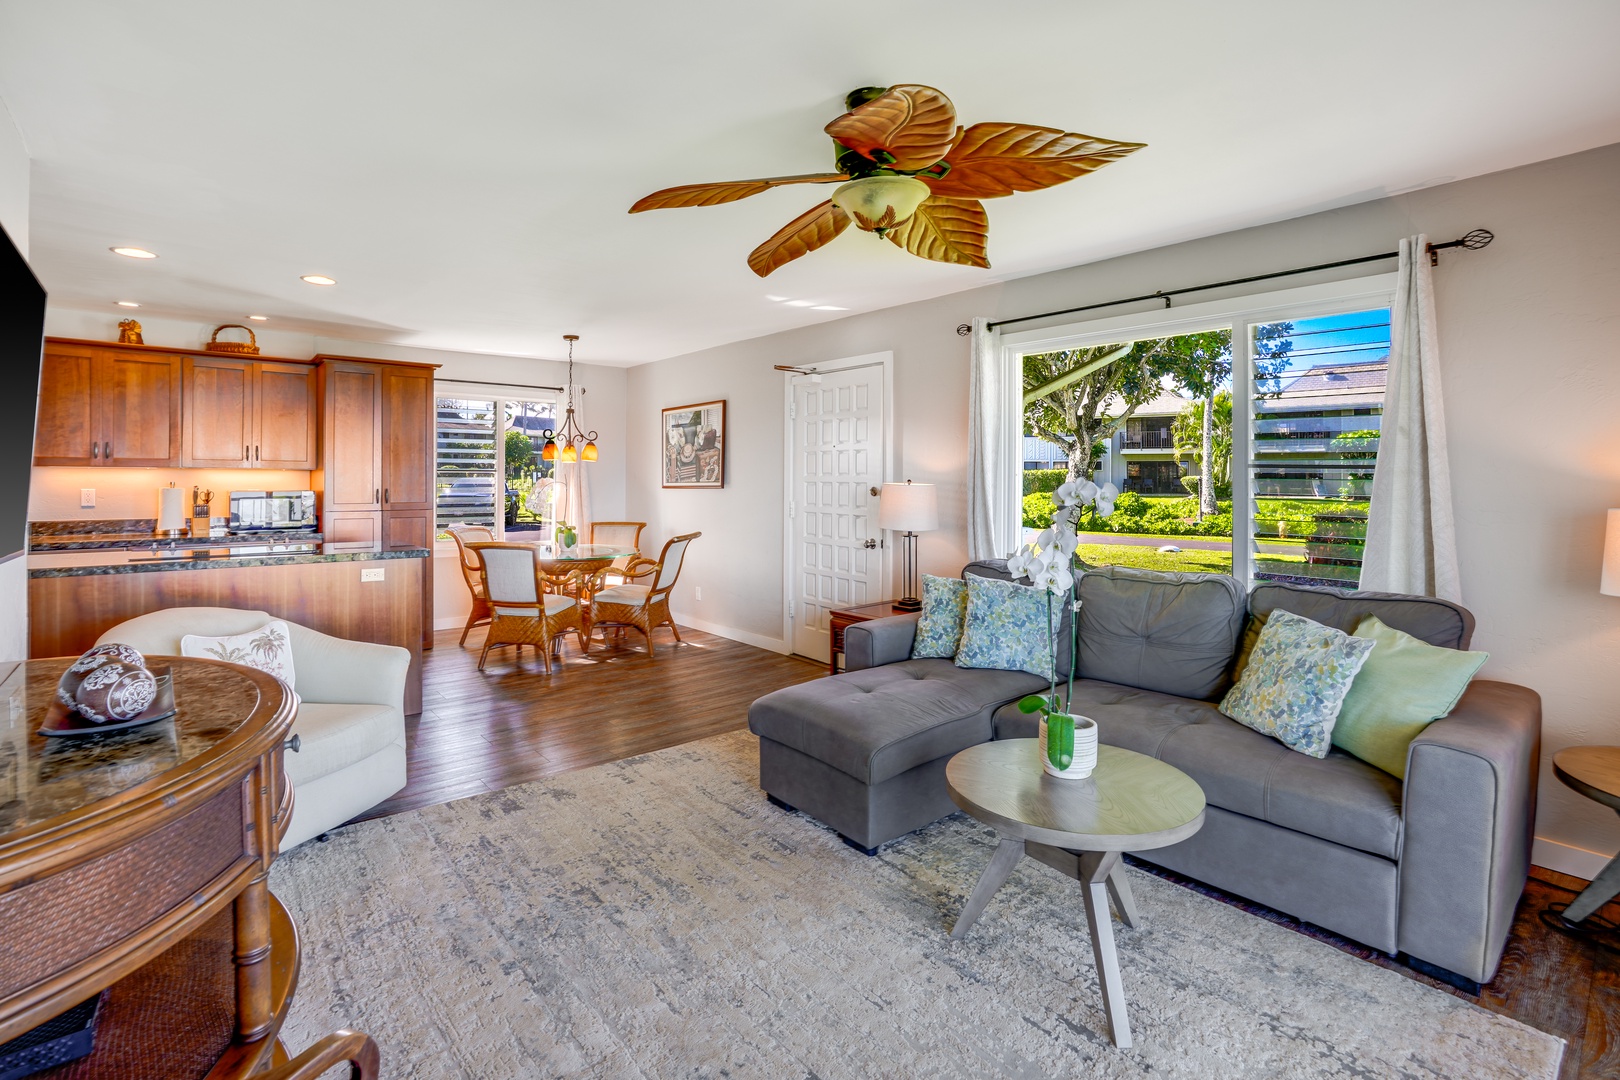 Princeville Vacation Rentals, Alii Kai 7201 - With a plush, sectional sofa and smart TV for relaxation and entertainment combined.